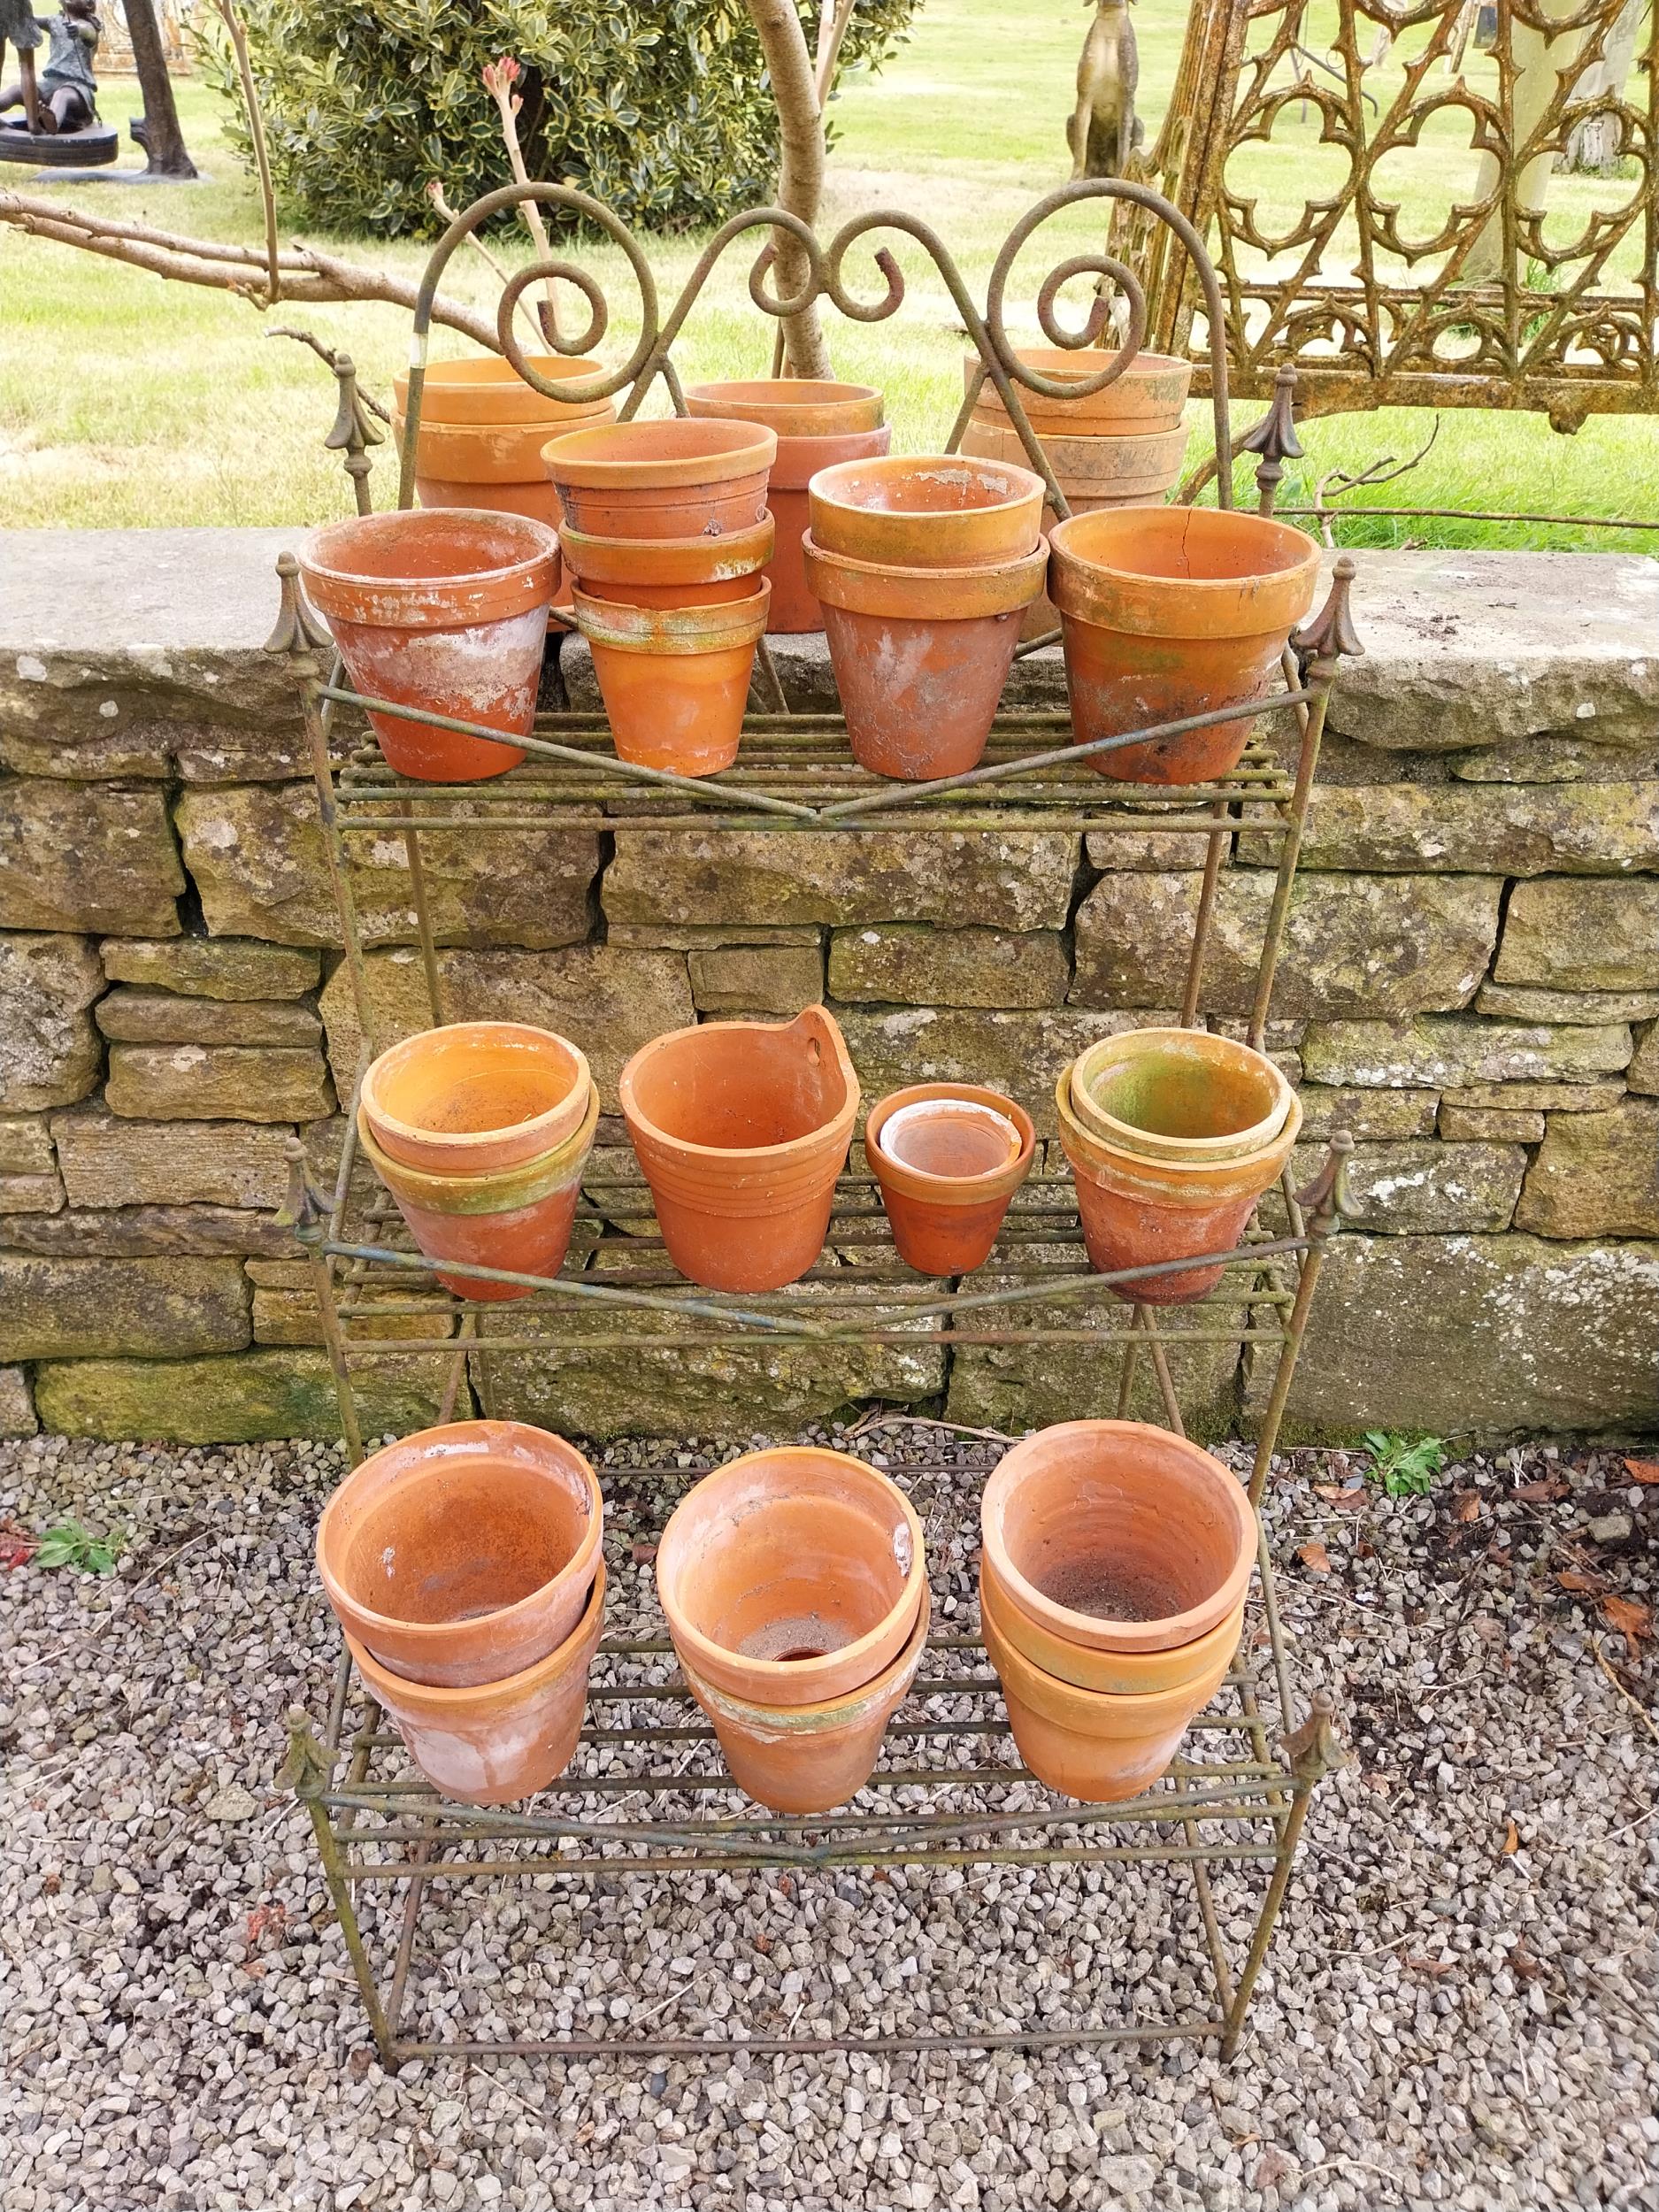 Large collection of terracotta plant pots.